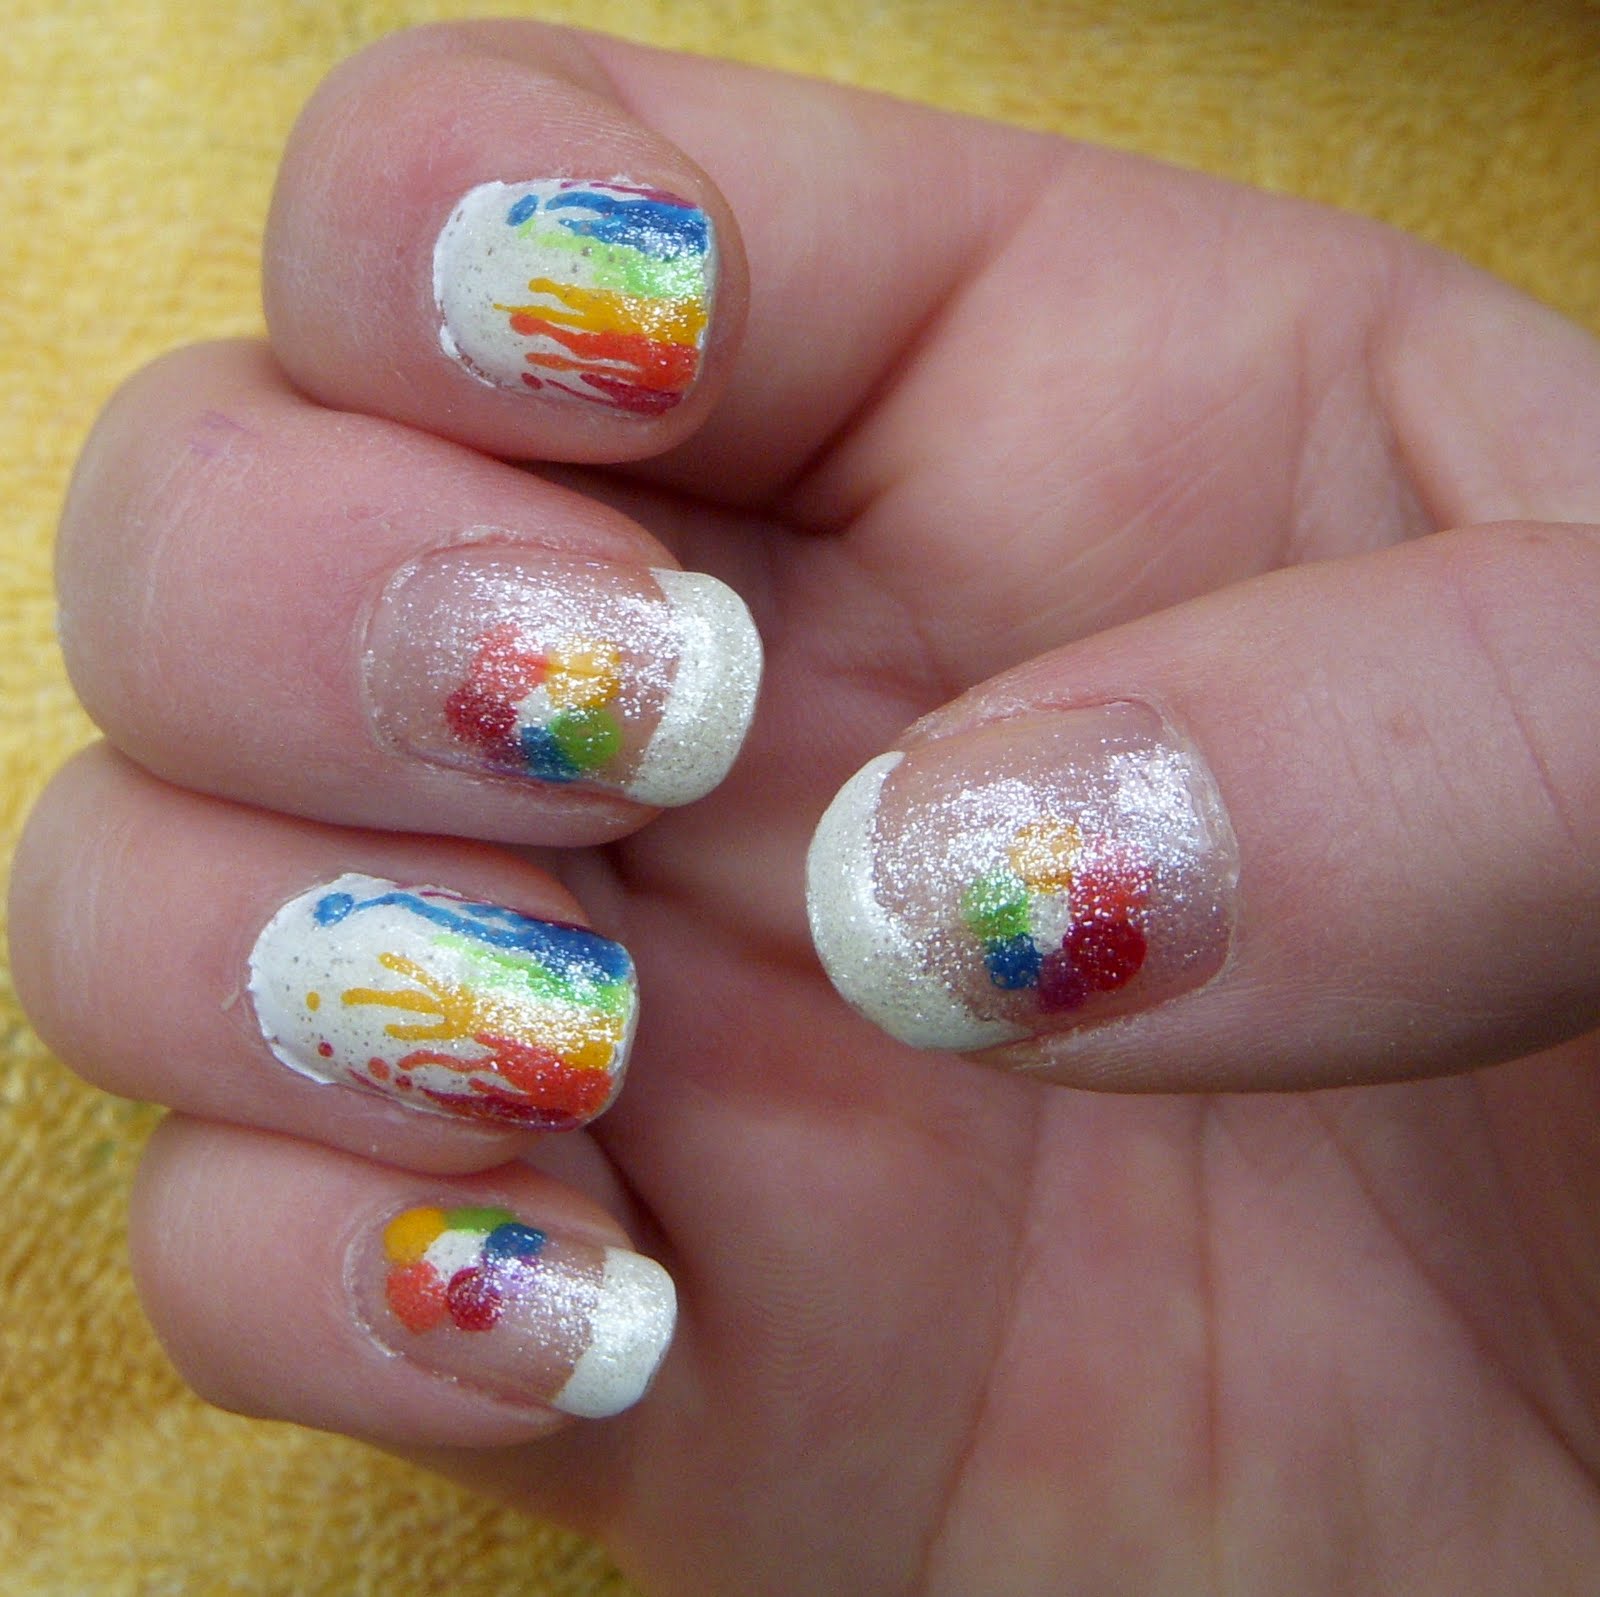 Quixii's Nails: 11/12/11 - Rainbow Streaks and Flowers